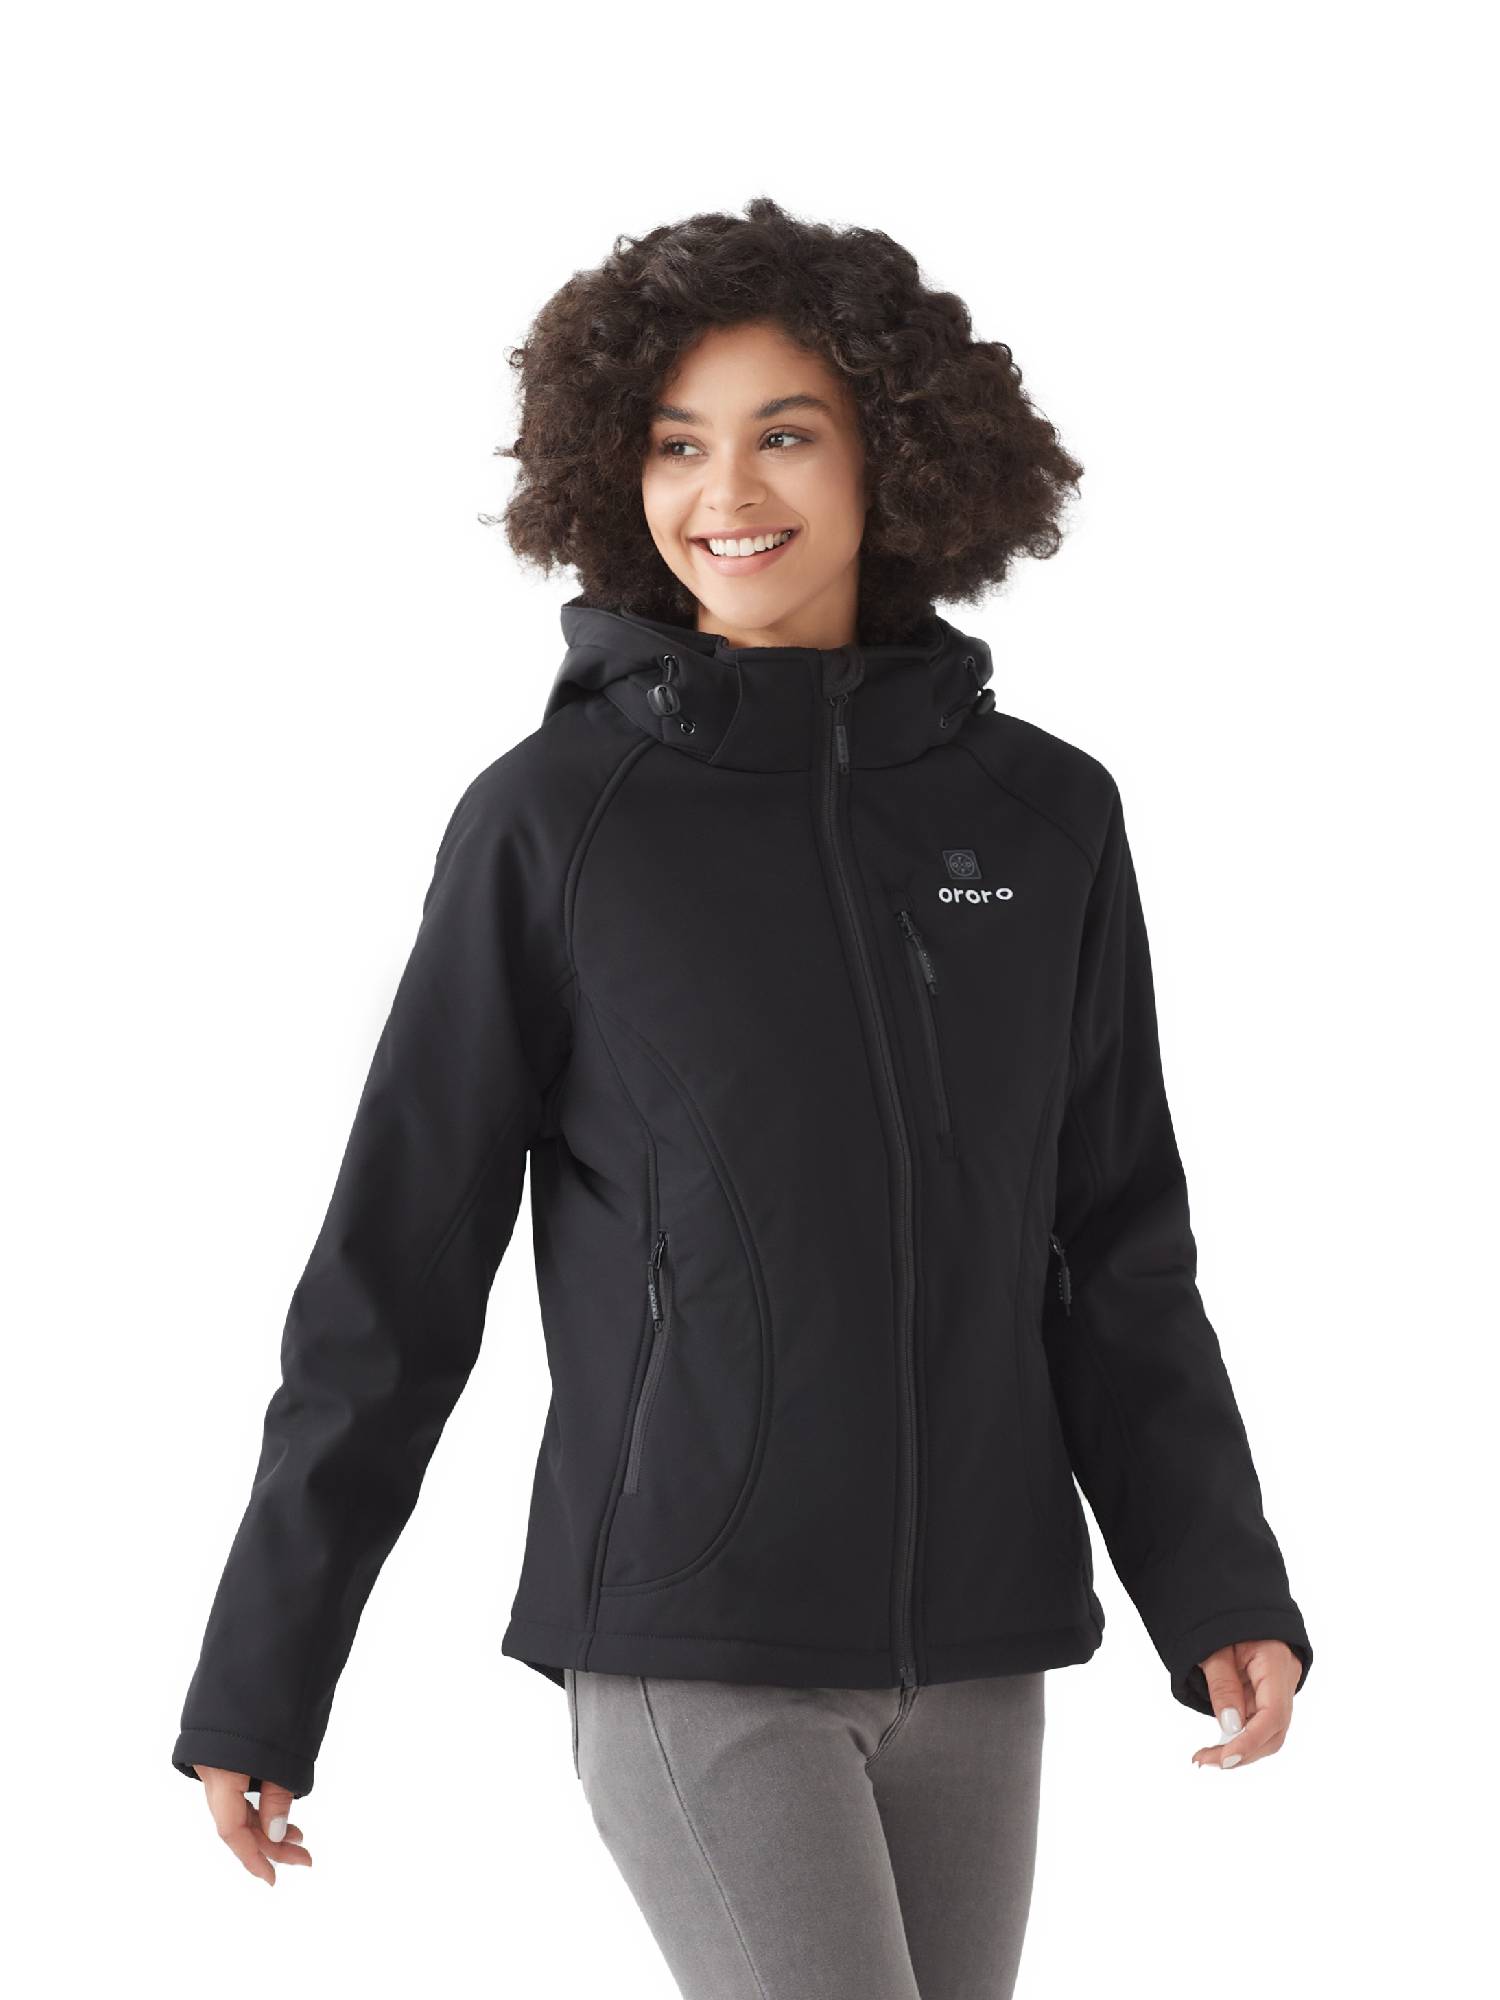 ORORO Women’s Heated Jacket with Battery, Heating Jacket with Removable Hood for Winter Outdoors (Black, L) - image 4 of 12